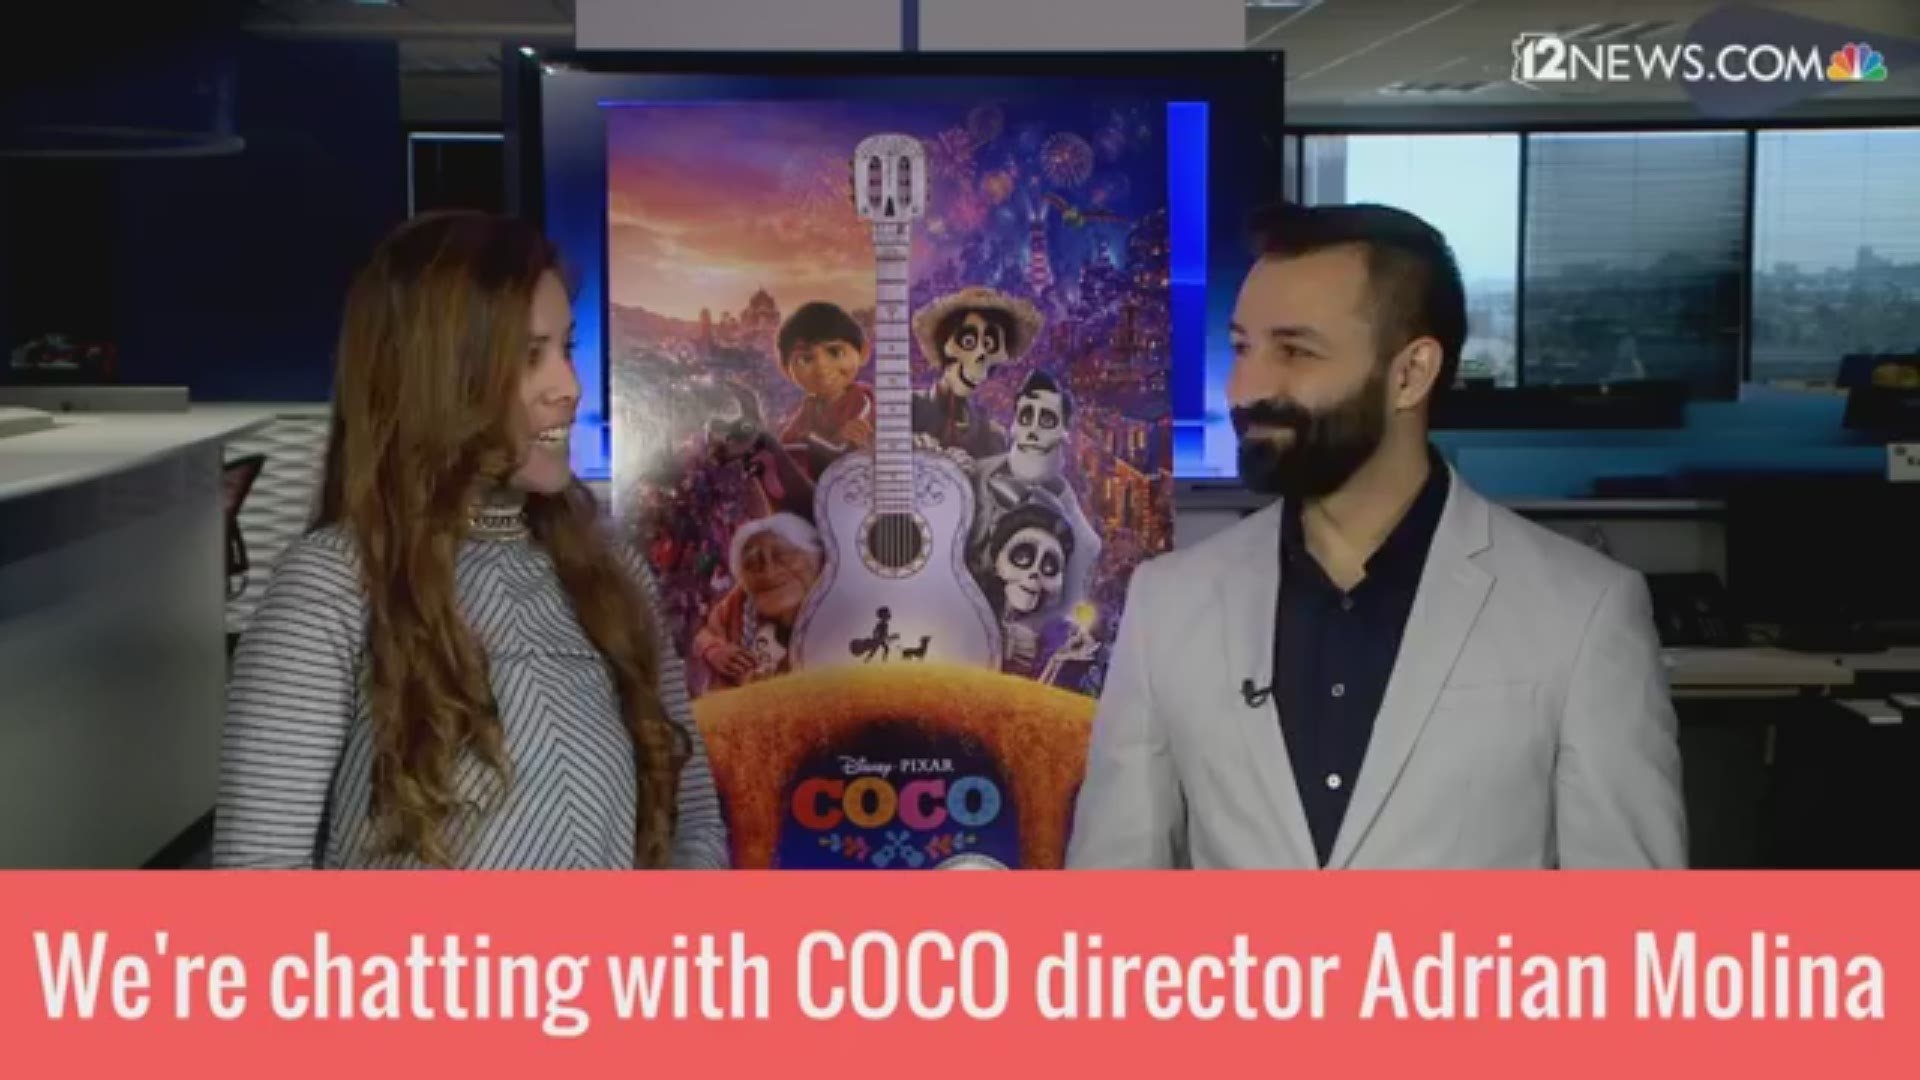 12 News spoke with the Co-Director of the film 'Coco' Adrian Molina